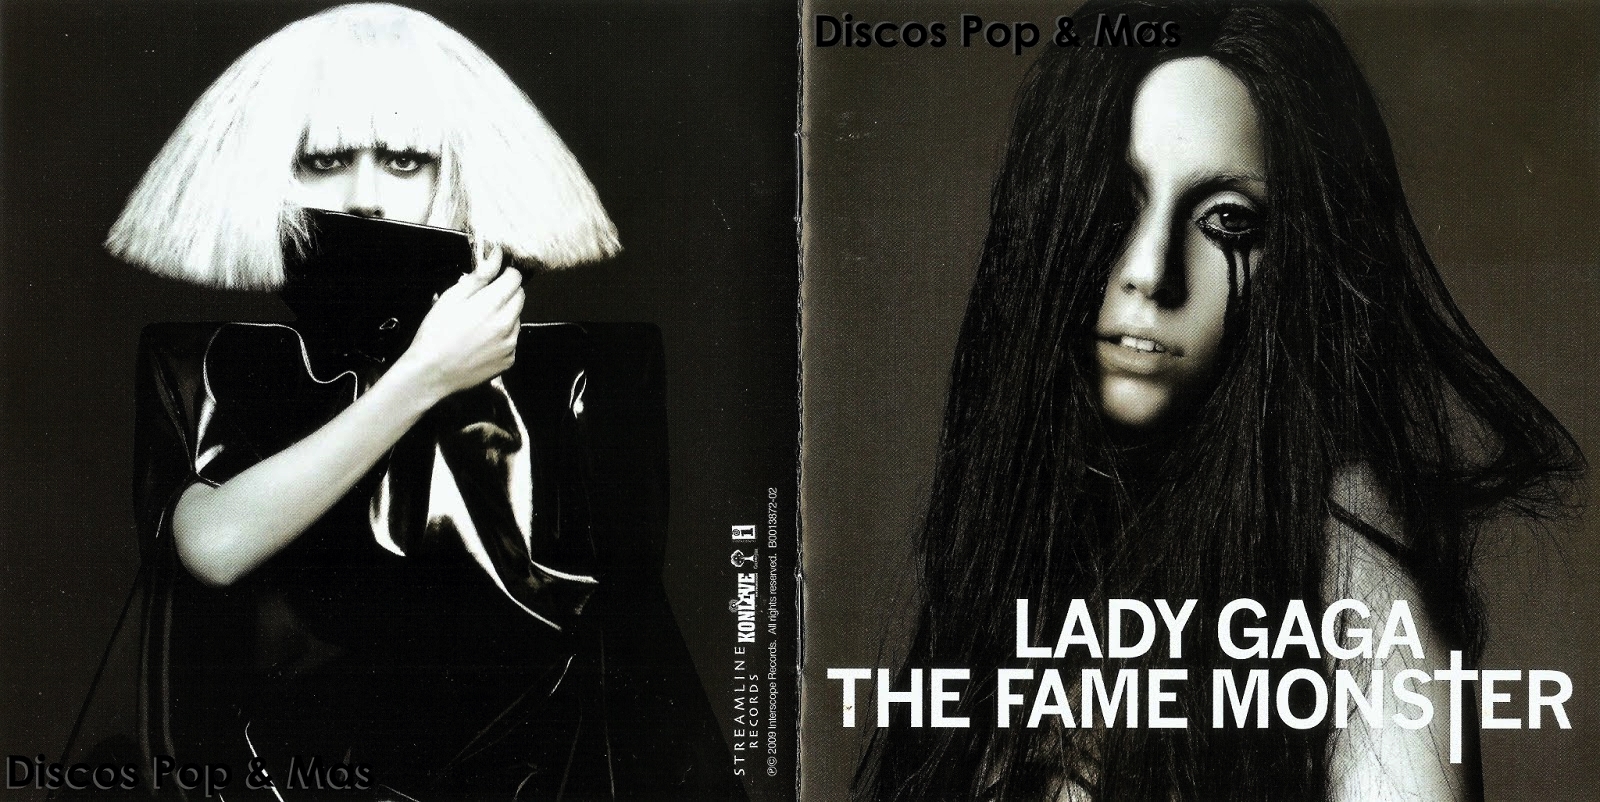 Lady GaGa - Monster From The Fame Monster EP, 2010